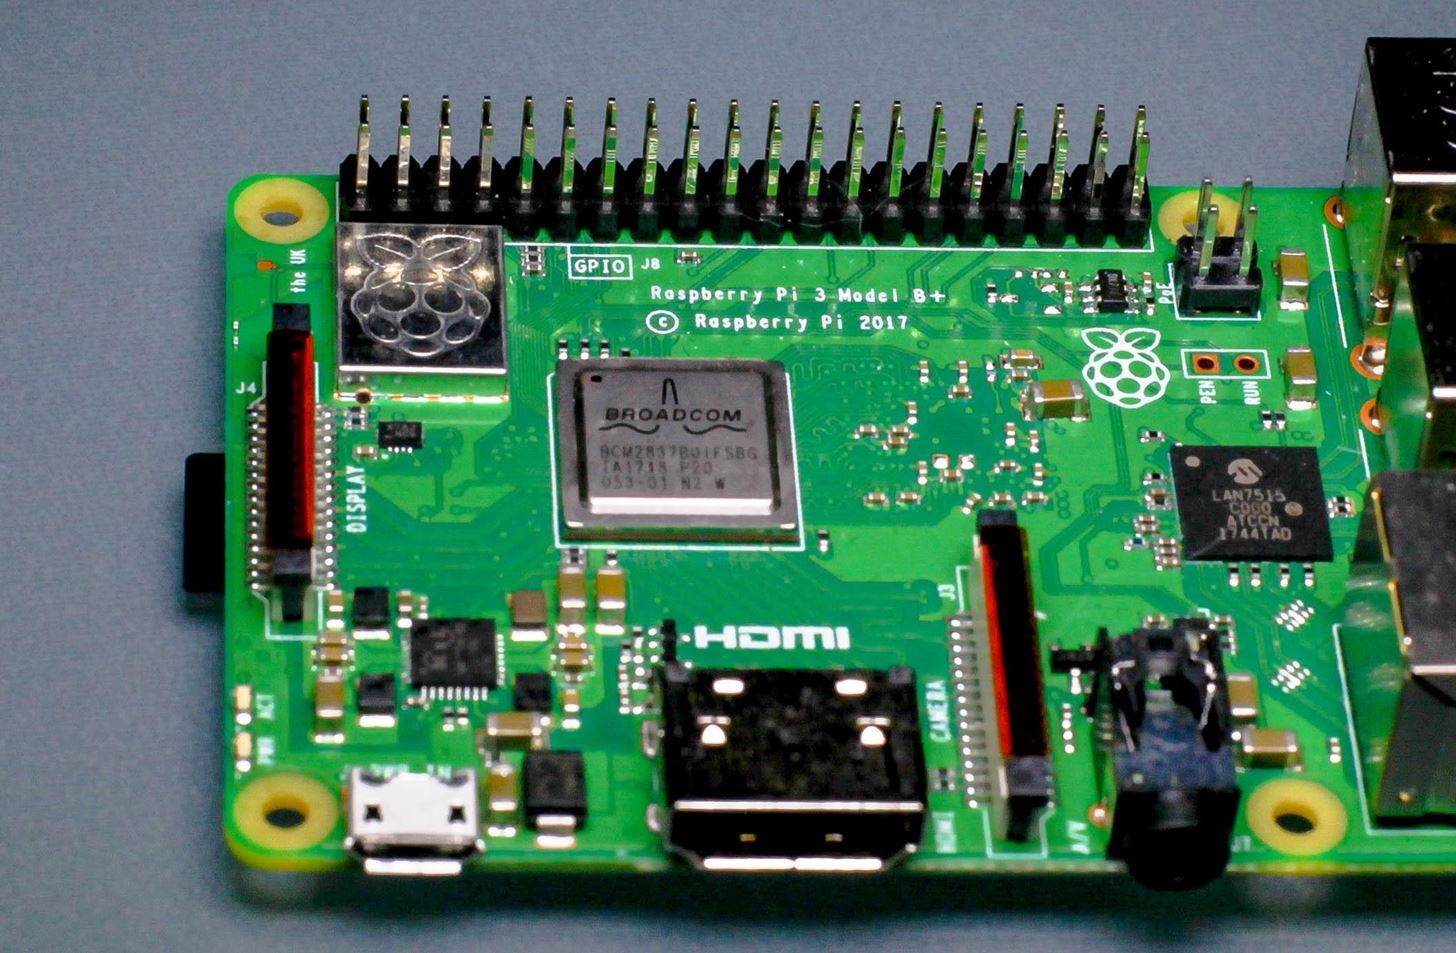 How to Build a Beginner Hacking Kit with the Raspberry Pi 3 Model B+